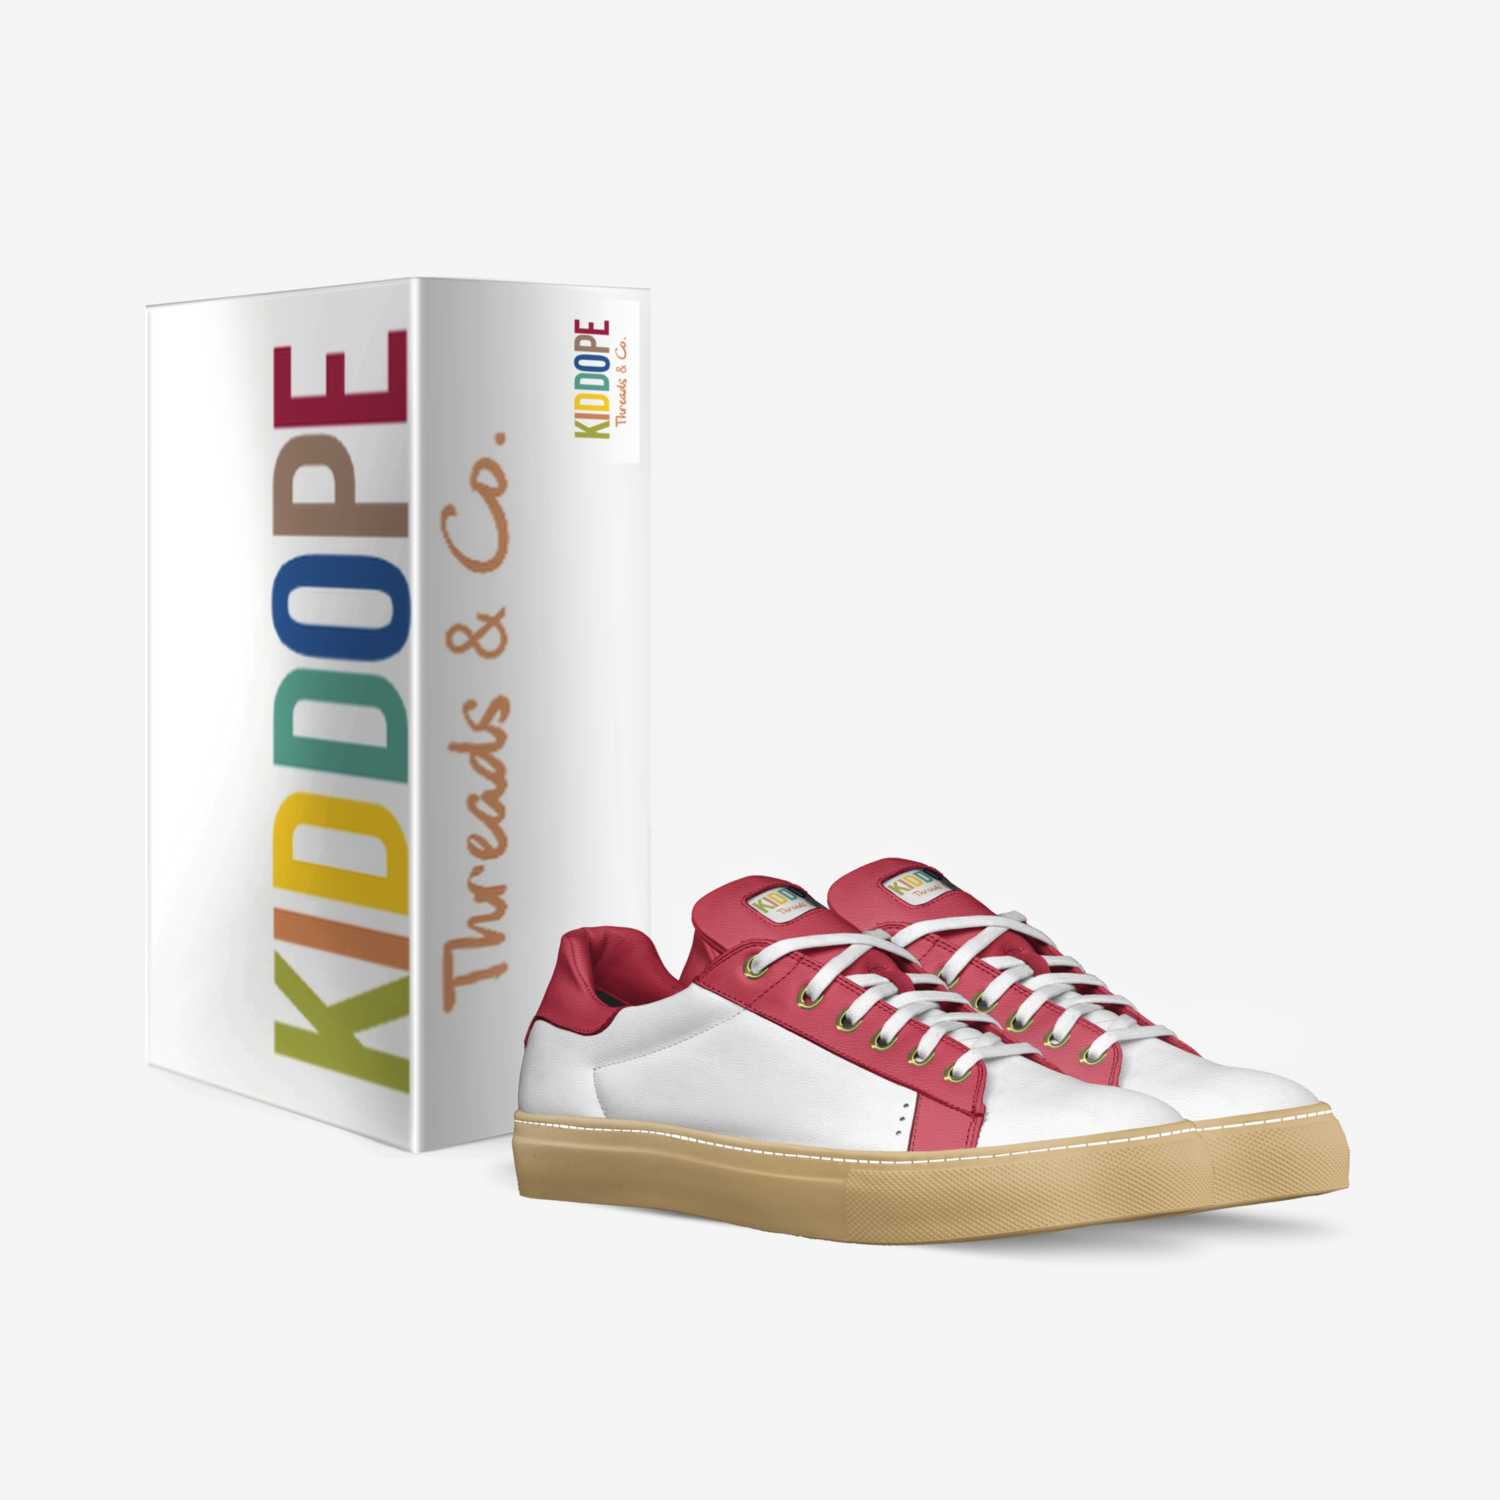 Kiddope Threads custom made in Italy shoes by Kuriyan Allen | Box view